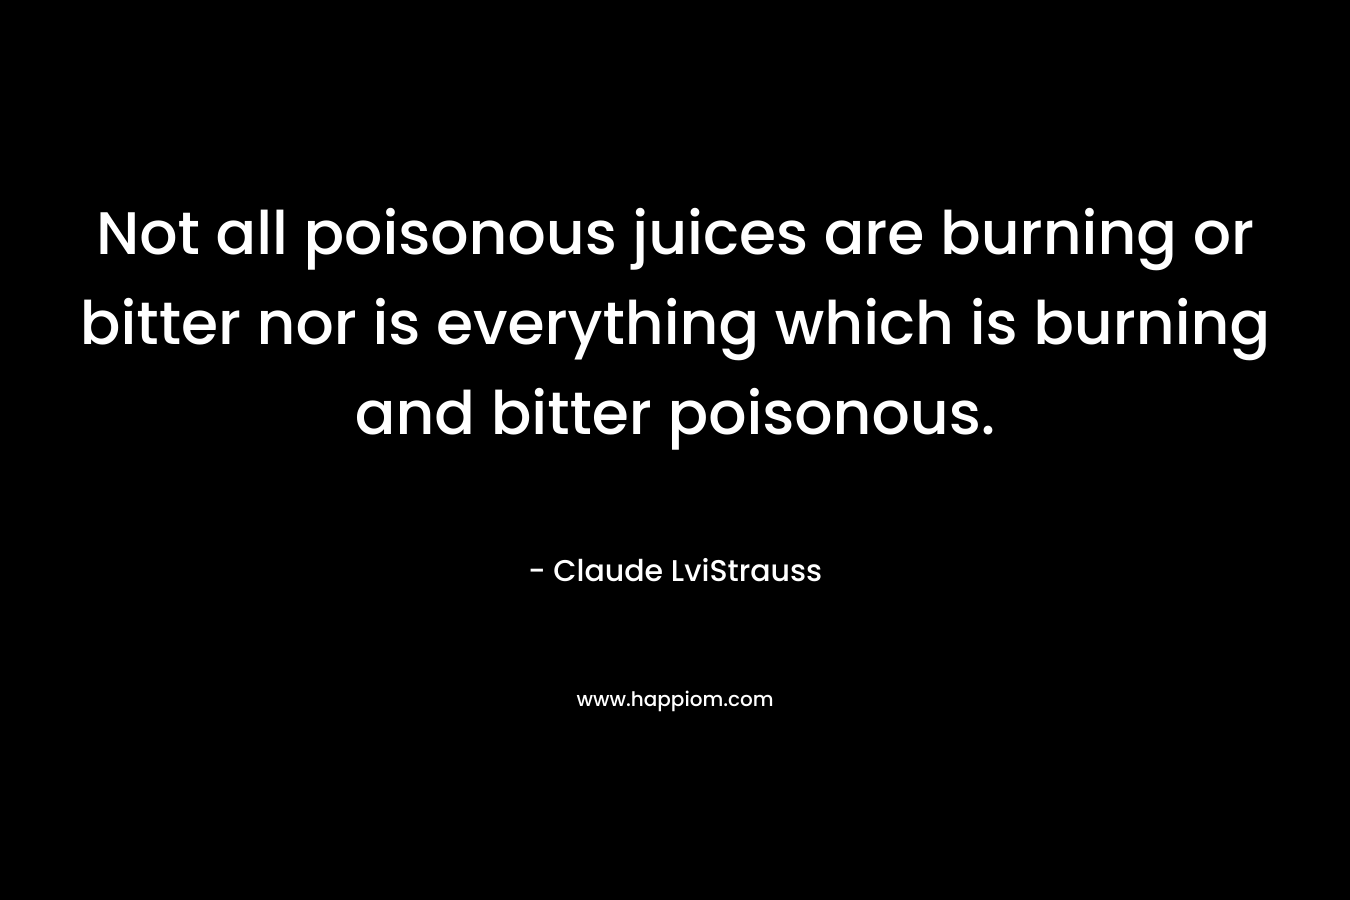 Not all poisonous juices are burning or bitter nor is everything which is burning and bitter poisonous.